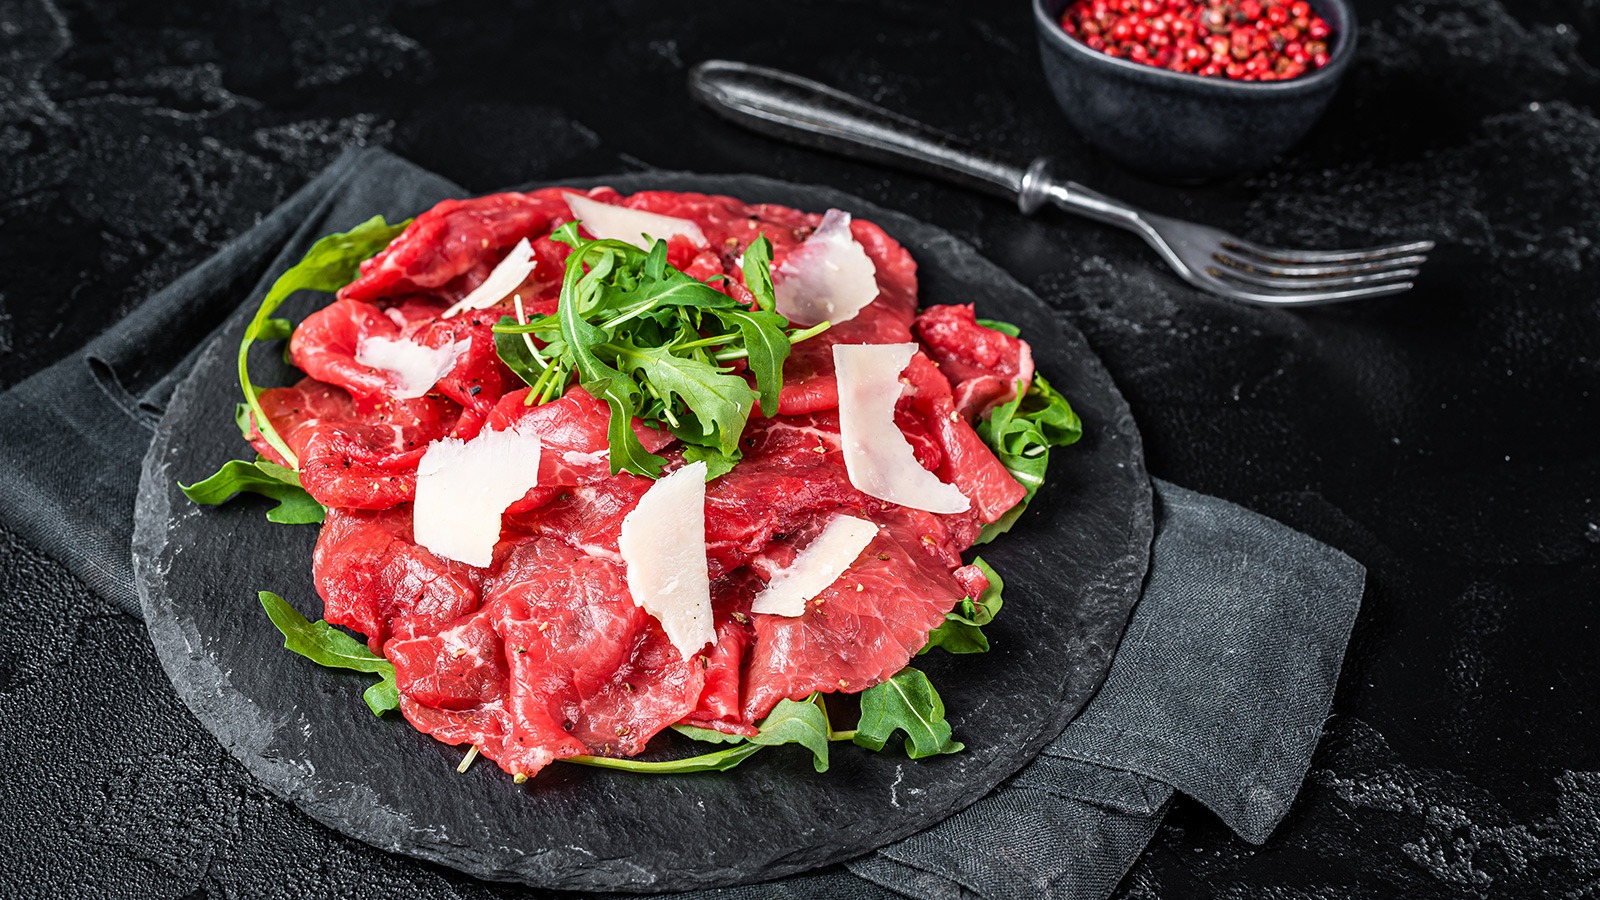 An artful presentation of beef Carpaccio, garnished with fresh arugula leaves and shavings of Parmesan cheese. The thinly sliced, ruby-hued raw beef arranged in a circle contrasts with the bright green of the arugula and the white Parmesan. The image evokes an enticing promise of a delightful blend of textures and flavors.